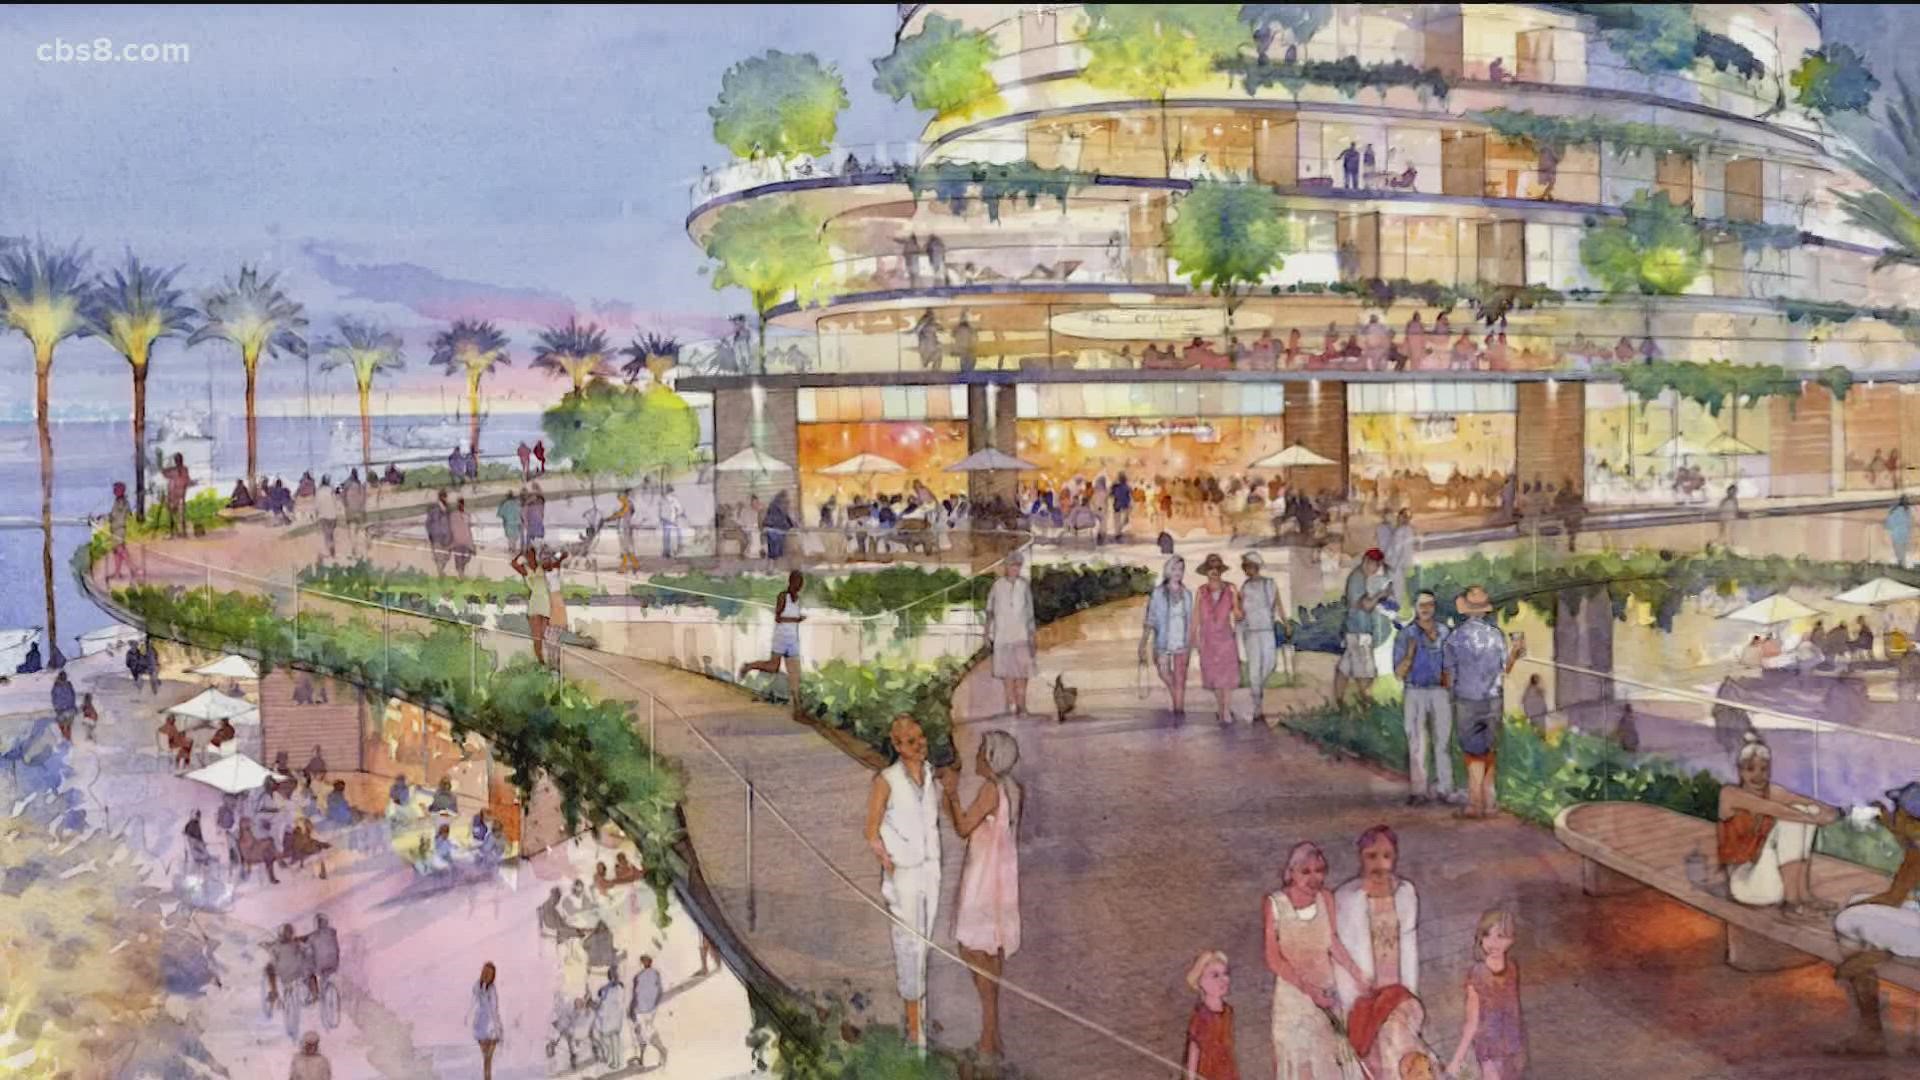 The future vision proposed for Seaport Village - SDtoday